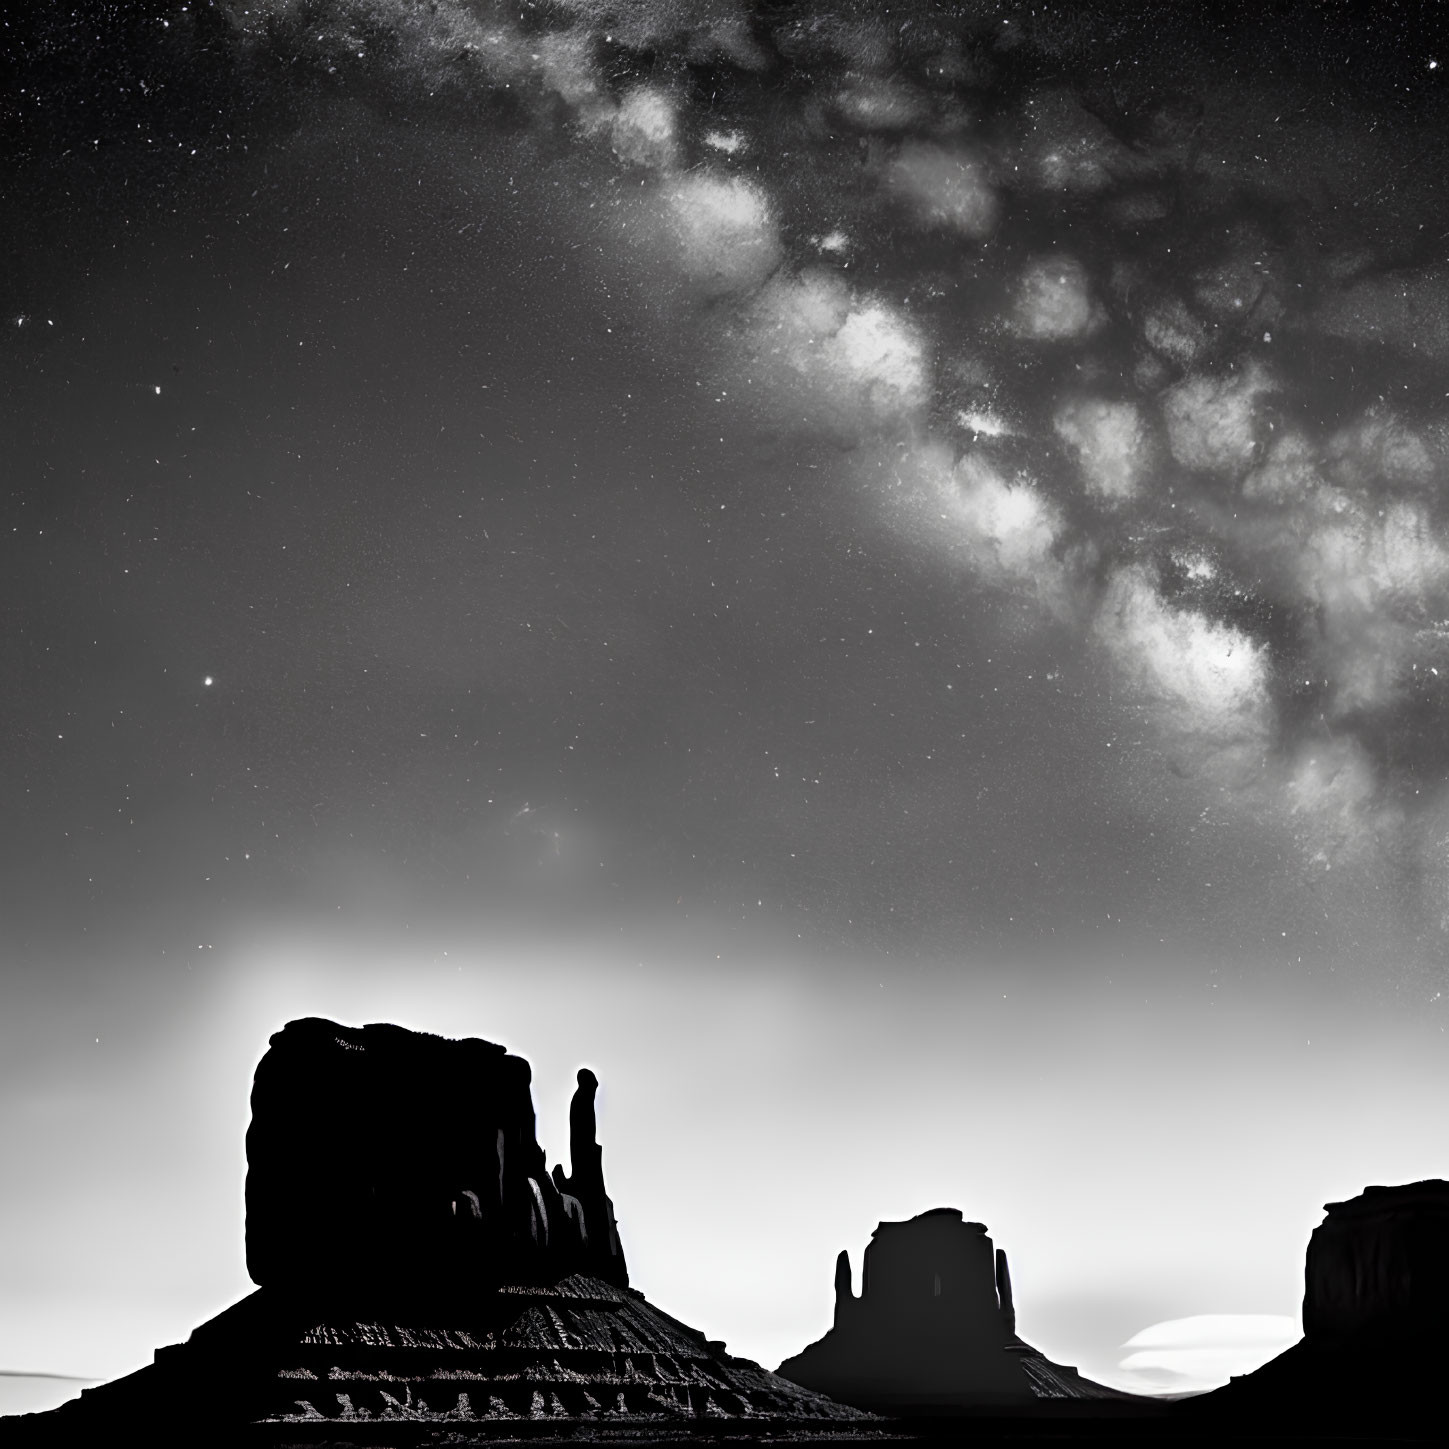 Monochrome image of starry sky over silhouetted rock formations